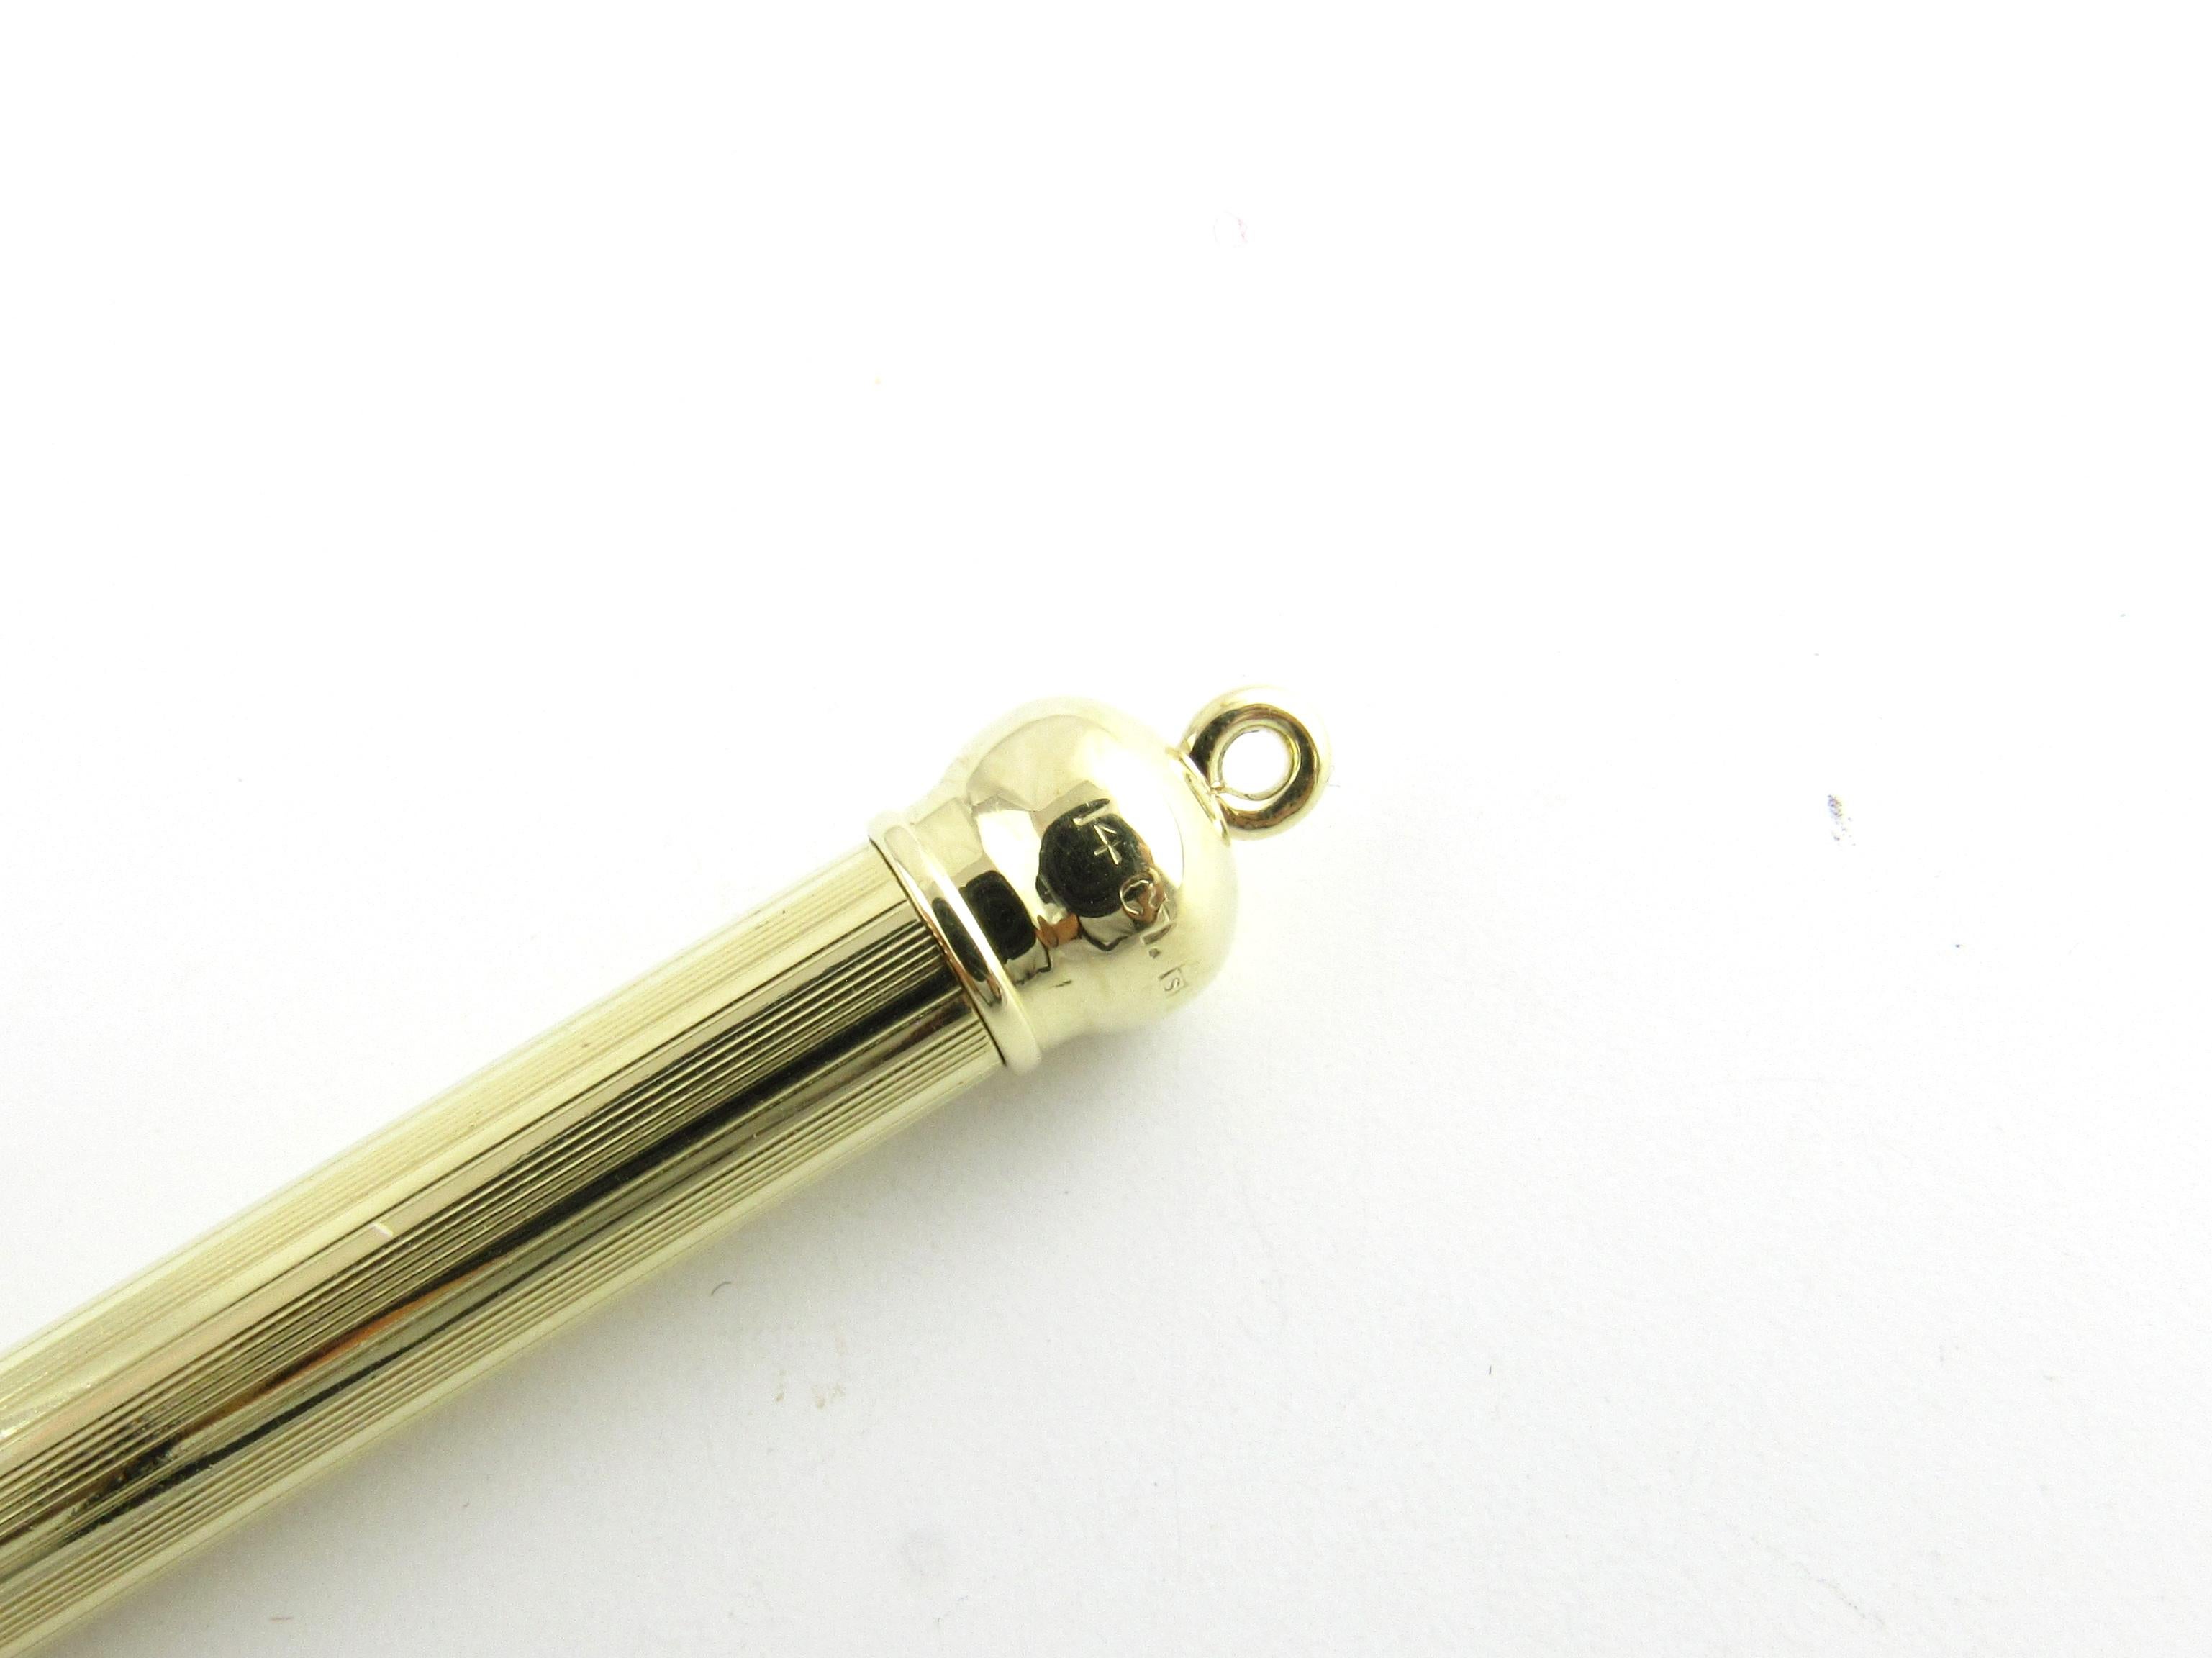 14 Karat Yellow Gold Telescopic Pencil In Good Condition For Sale In Washington Depot, CT